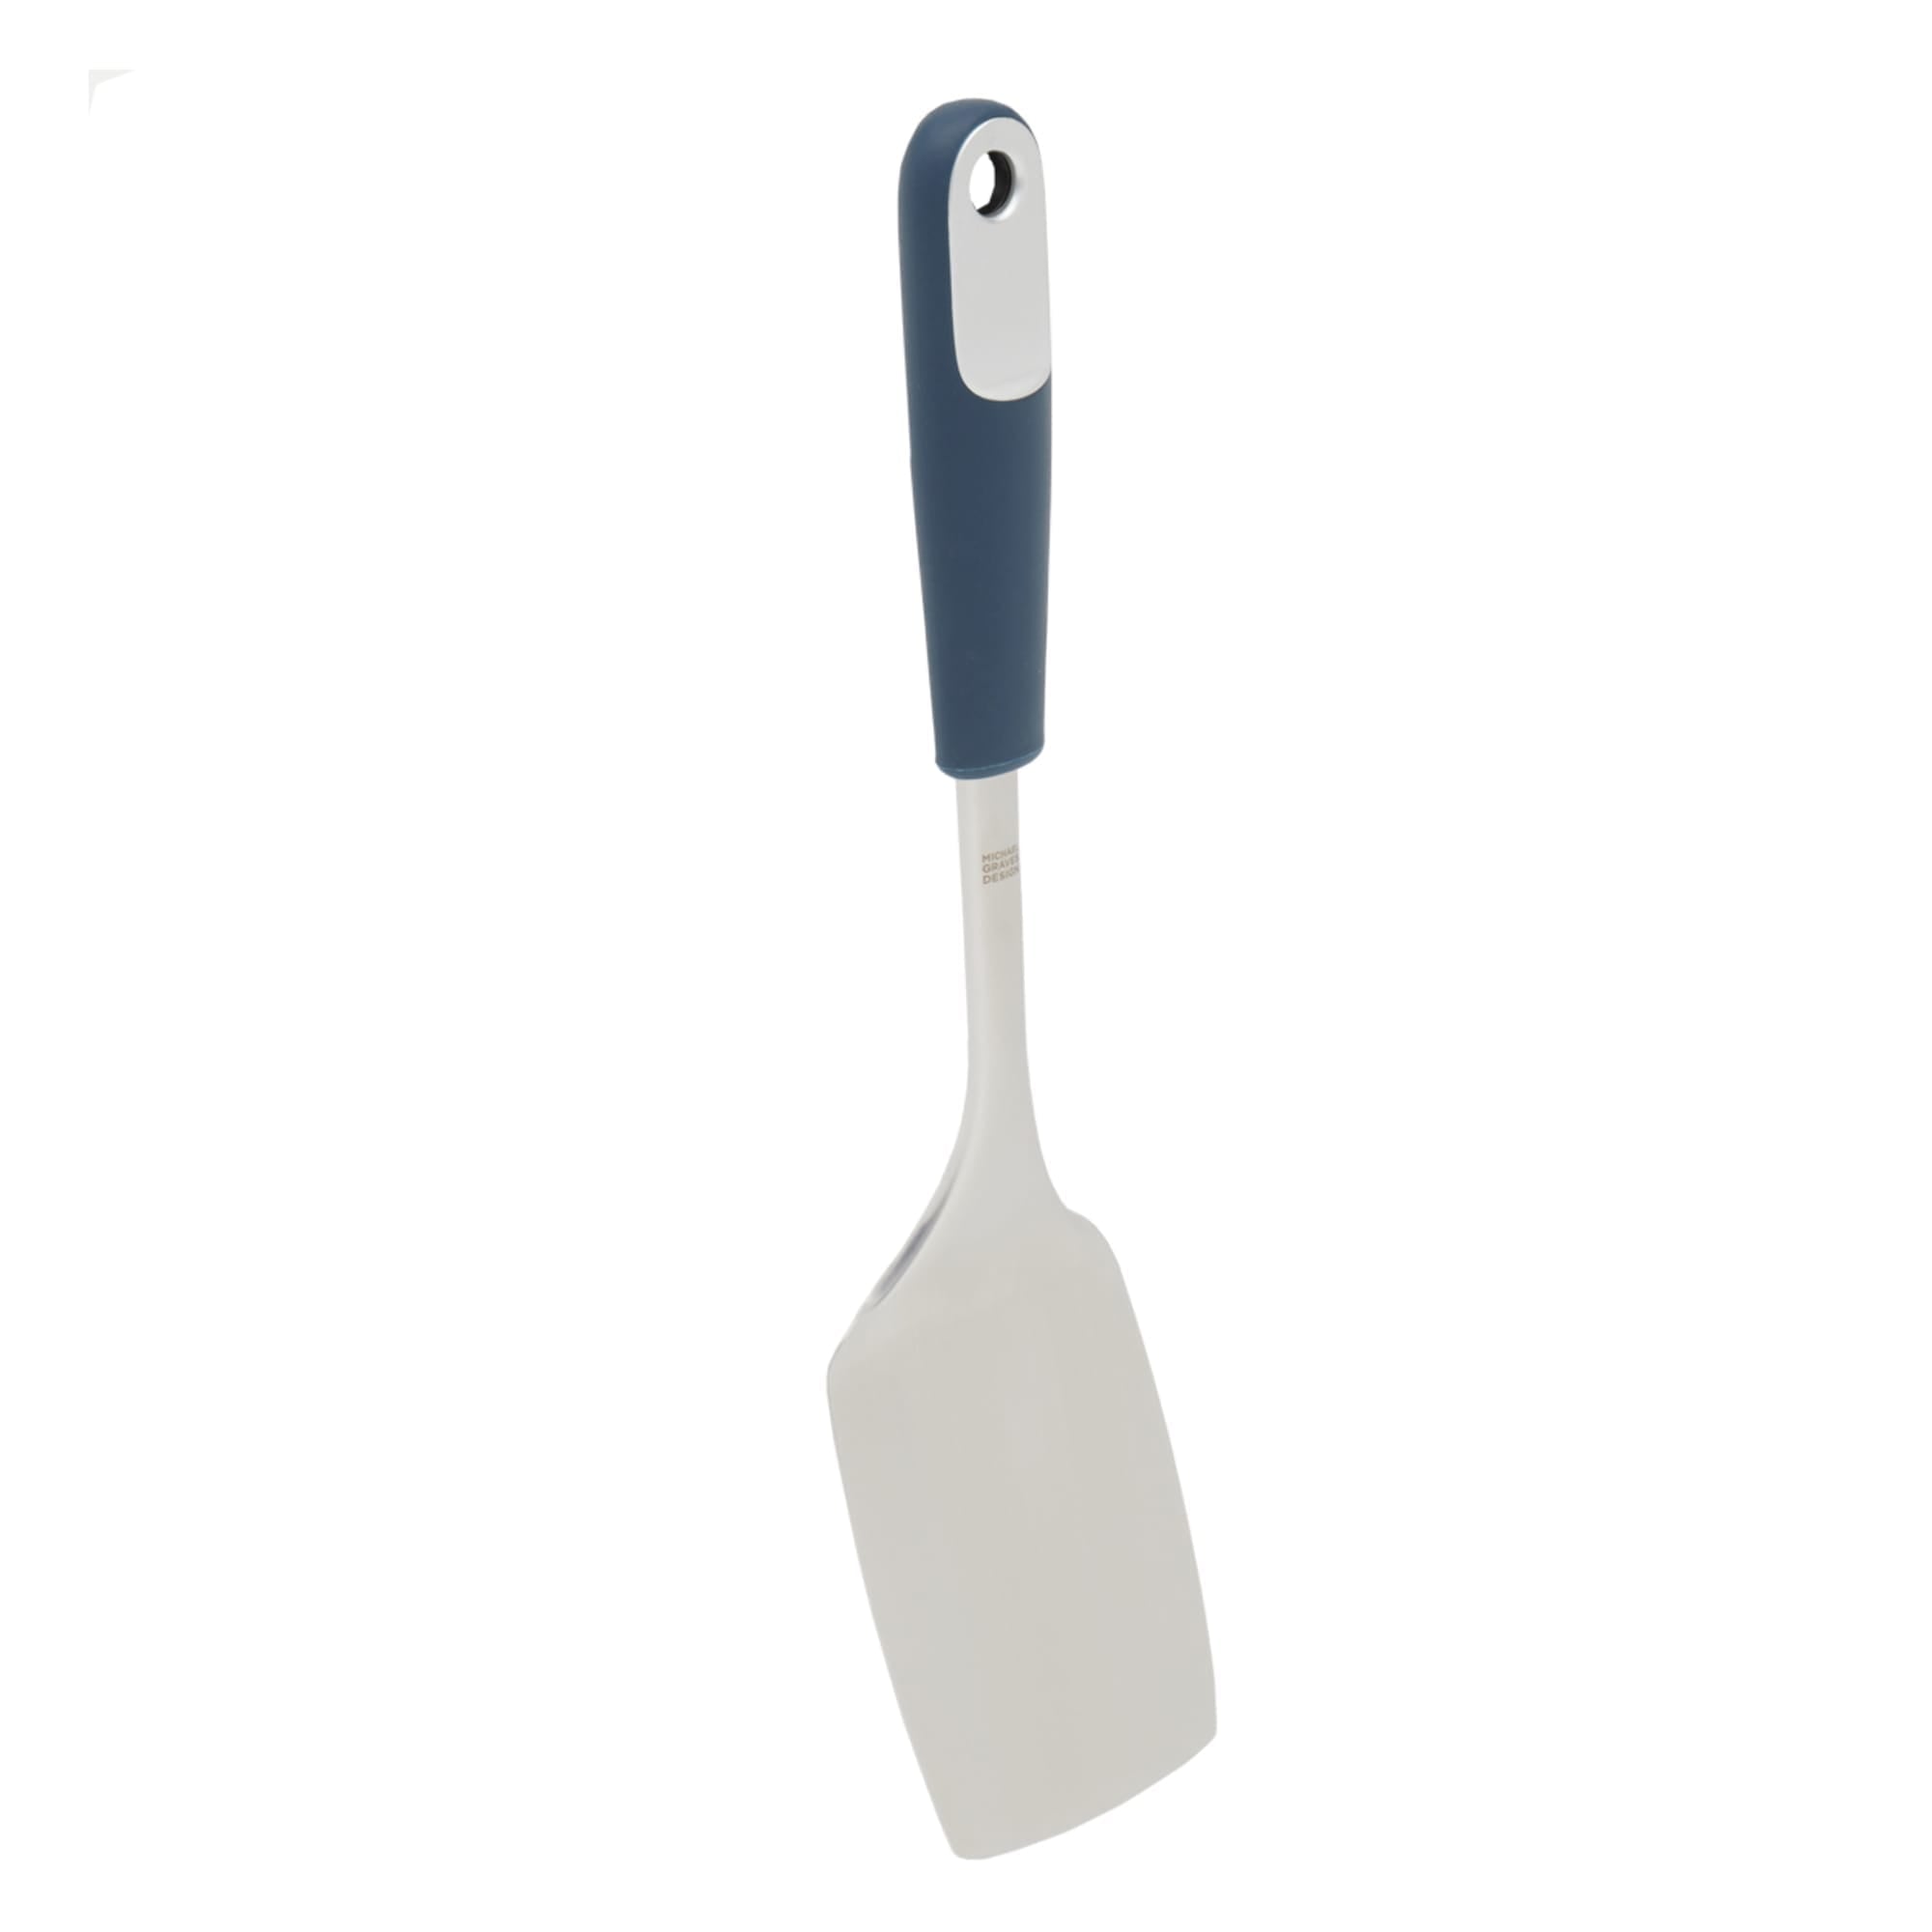 Michael Graves Design Comfortable Grip Stainless Steel Spatula, Indigo $4.00 EACH, CASE PACK OF 24